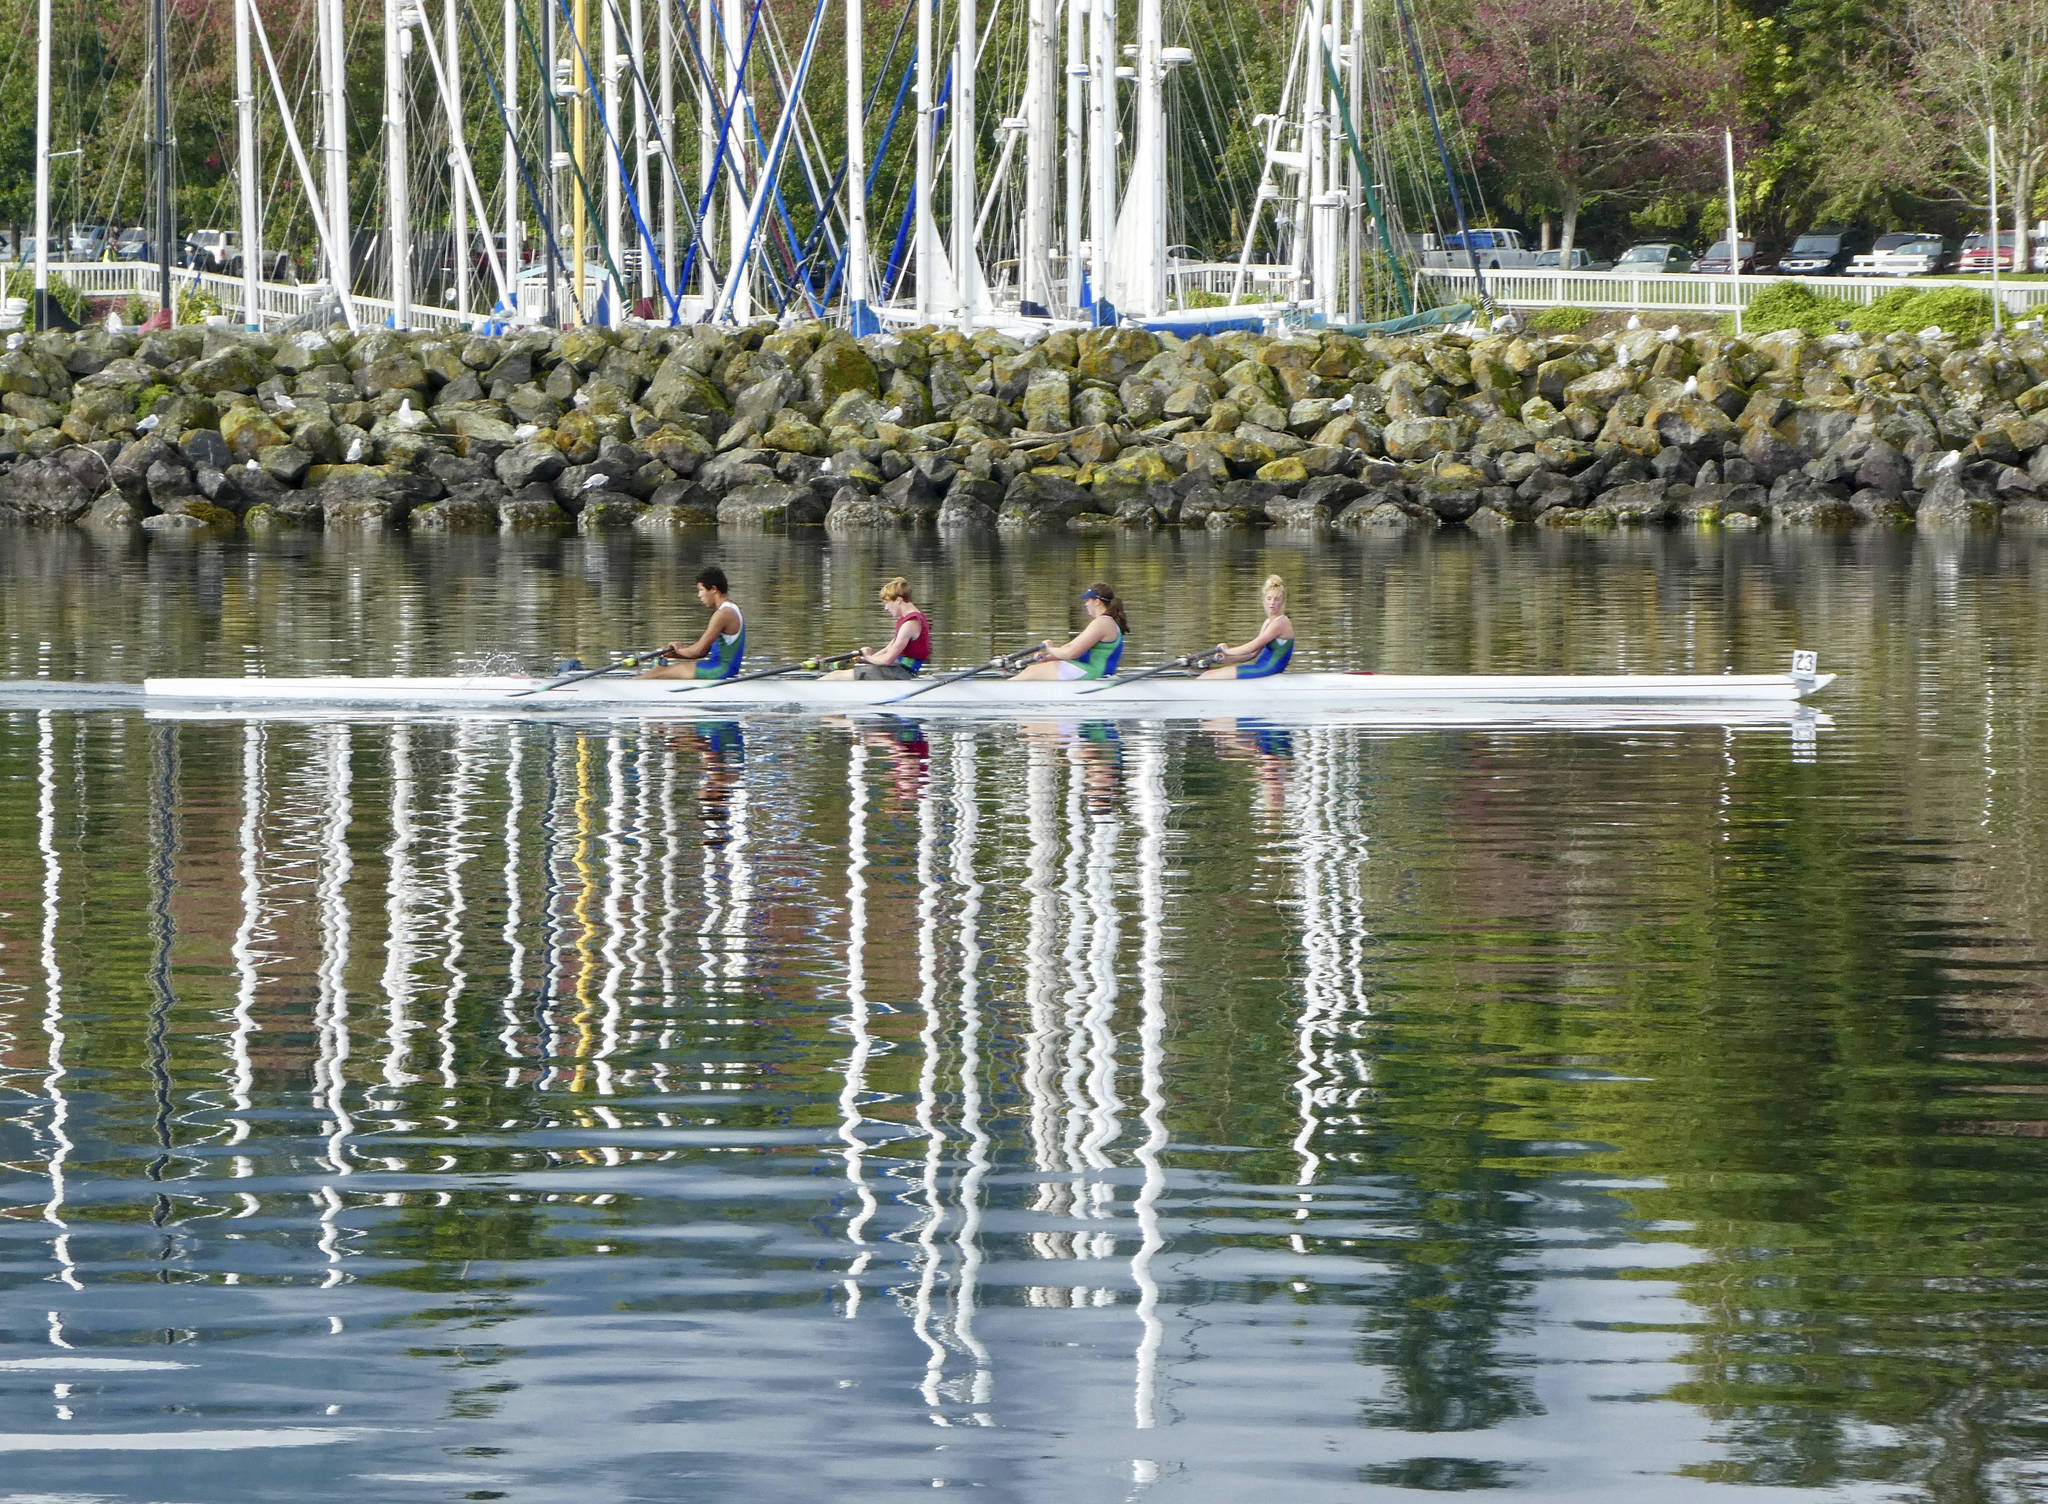 Winners of the 2018 Row for Hospice on Sept. 15 include competitors with the Olympic Peninsula Rowing Association Juniors team. Twenty-two entries and 54 people participated in the rowing portion of last week’s activities that included the Reach for Hospice sailboat races and Waterfront Day activities, event organizers said. Submitted photo